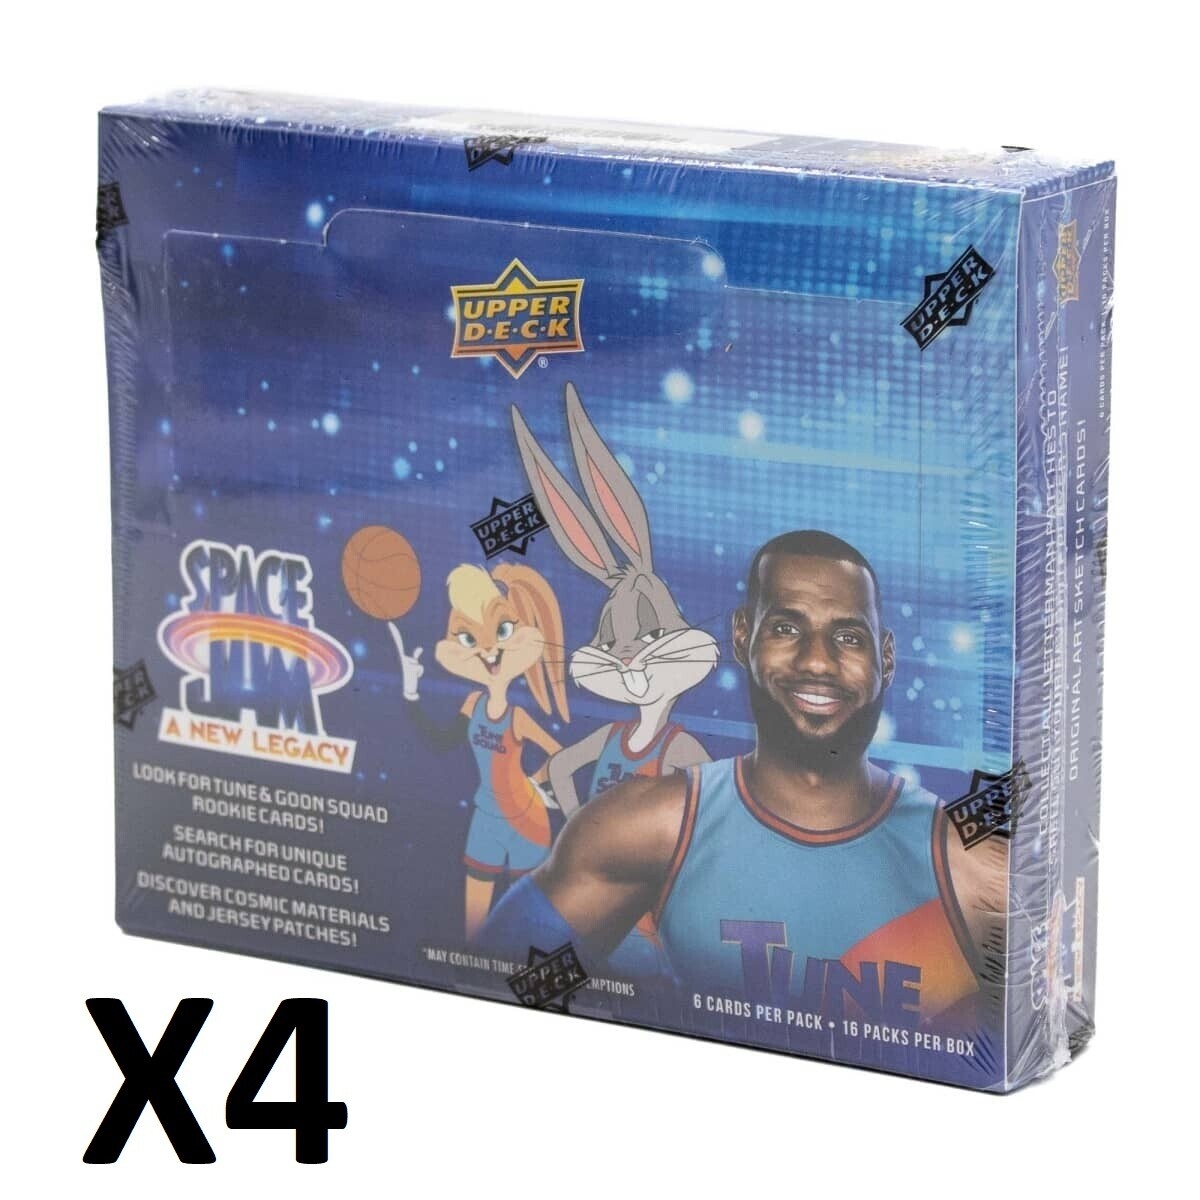 Upper Deck - Space Jam : A New Legacy Hobby Box (lot of 4 boxes)